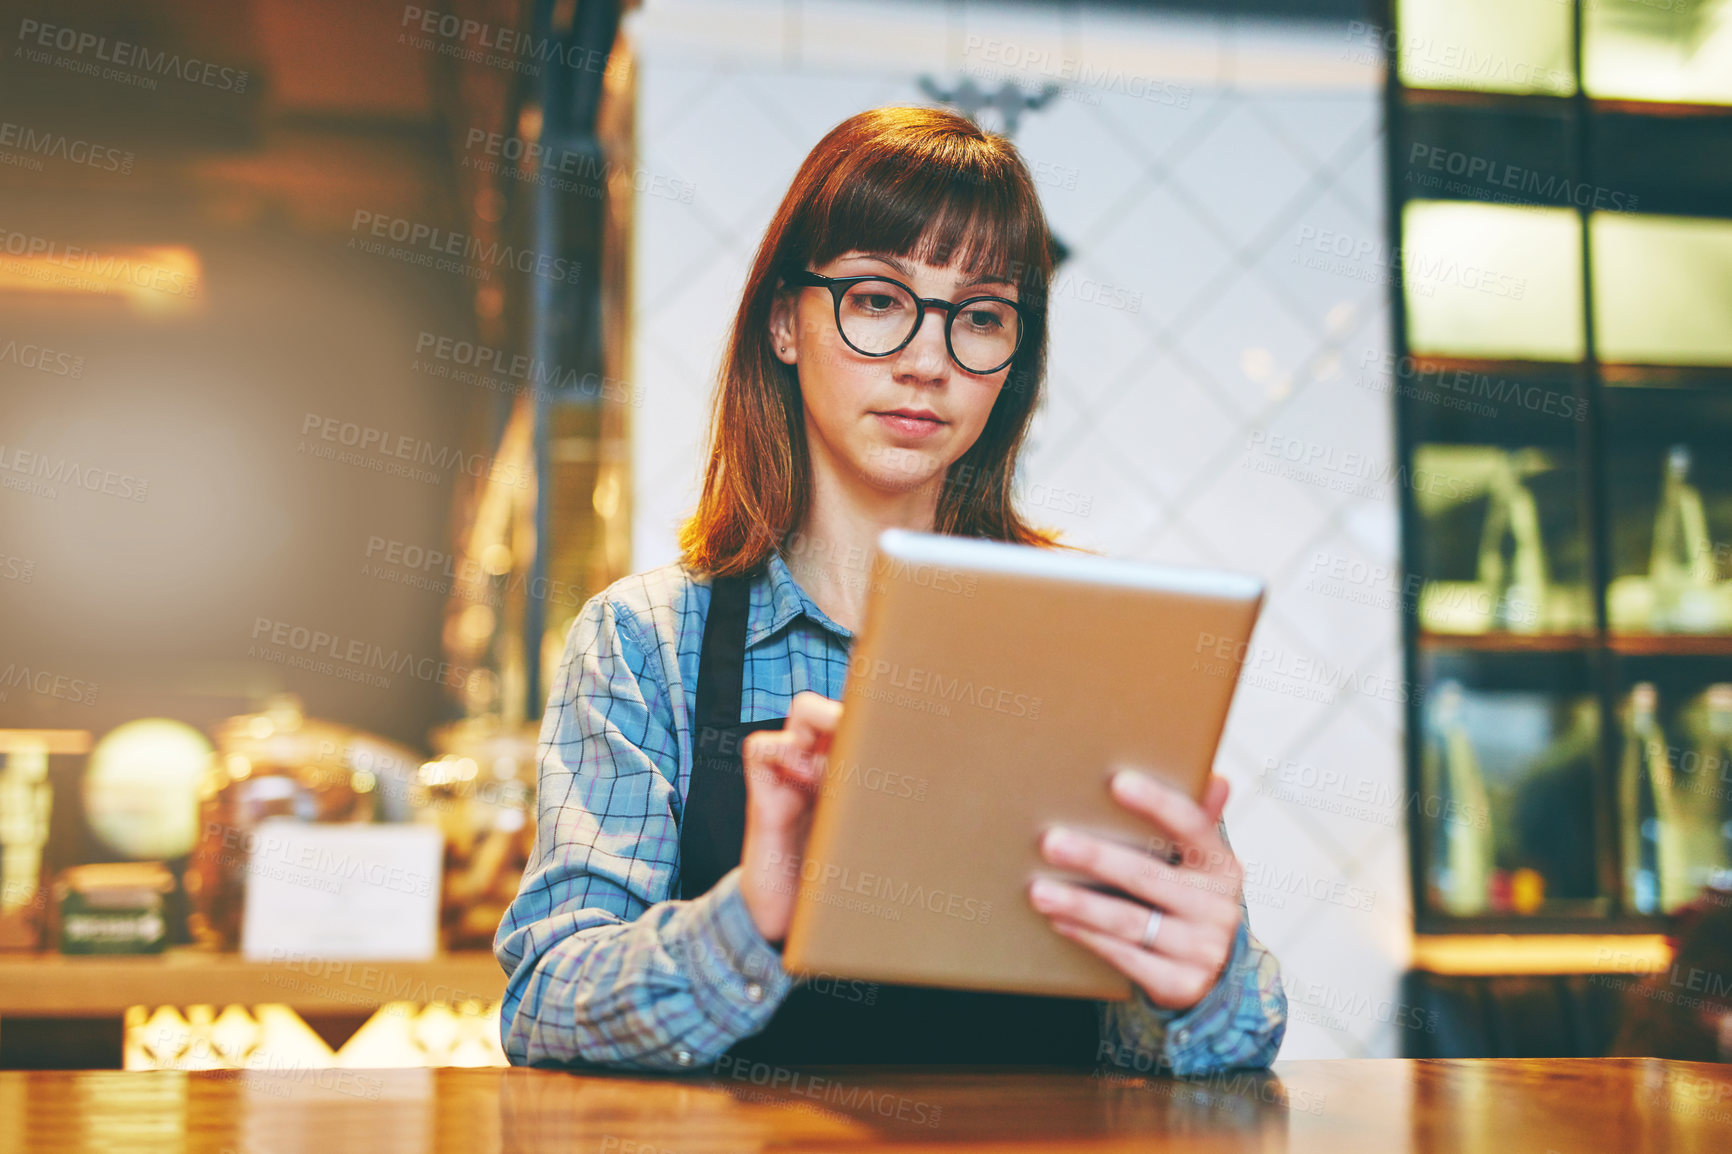 Buy stock photo Shot of a young business owner using a digital tablet in her cafe